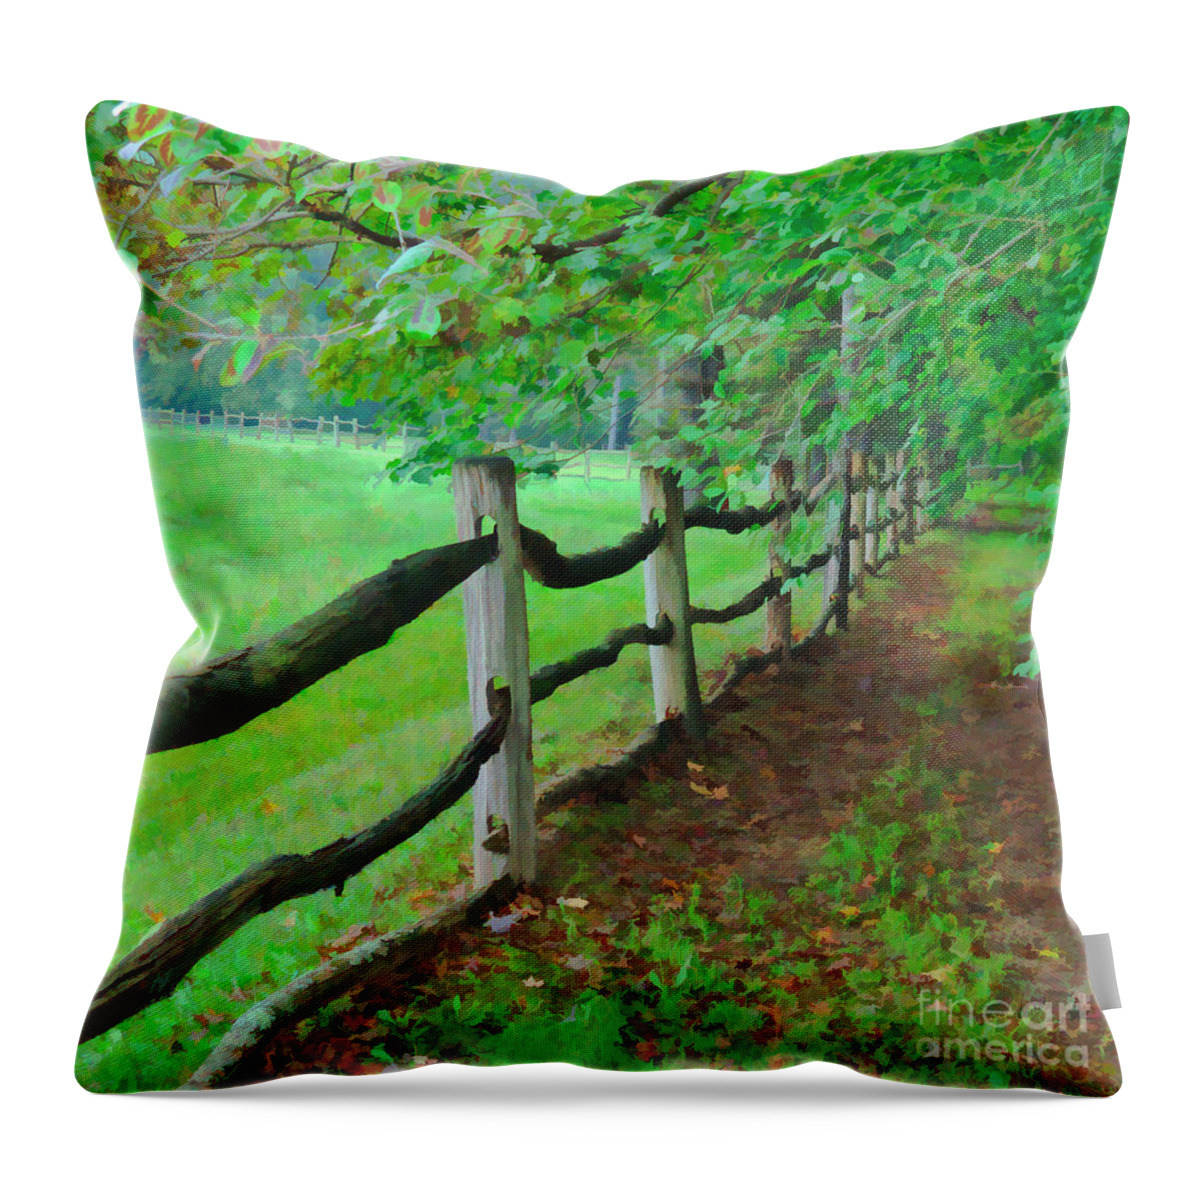 Old Wood Rail Fence Throw Pillow featuring the digital art The Fence Path by L J Oakes